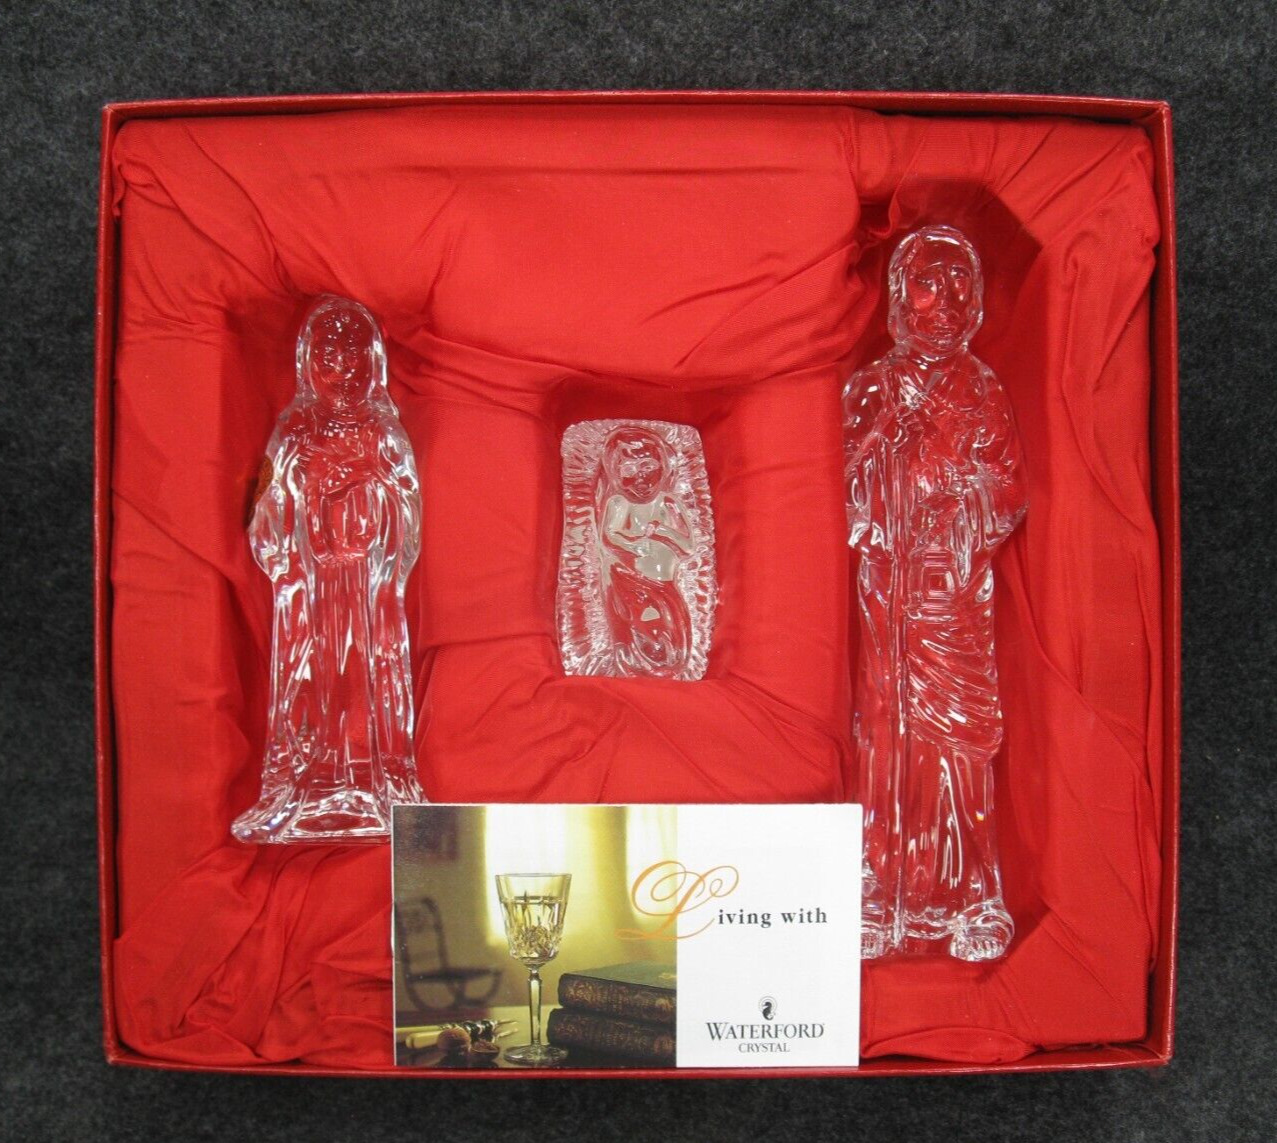 Waterford Crystal Nativity Collection The Holy Family Set with Original Box VTG